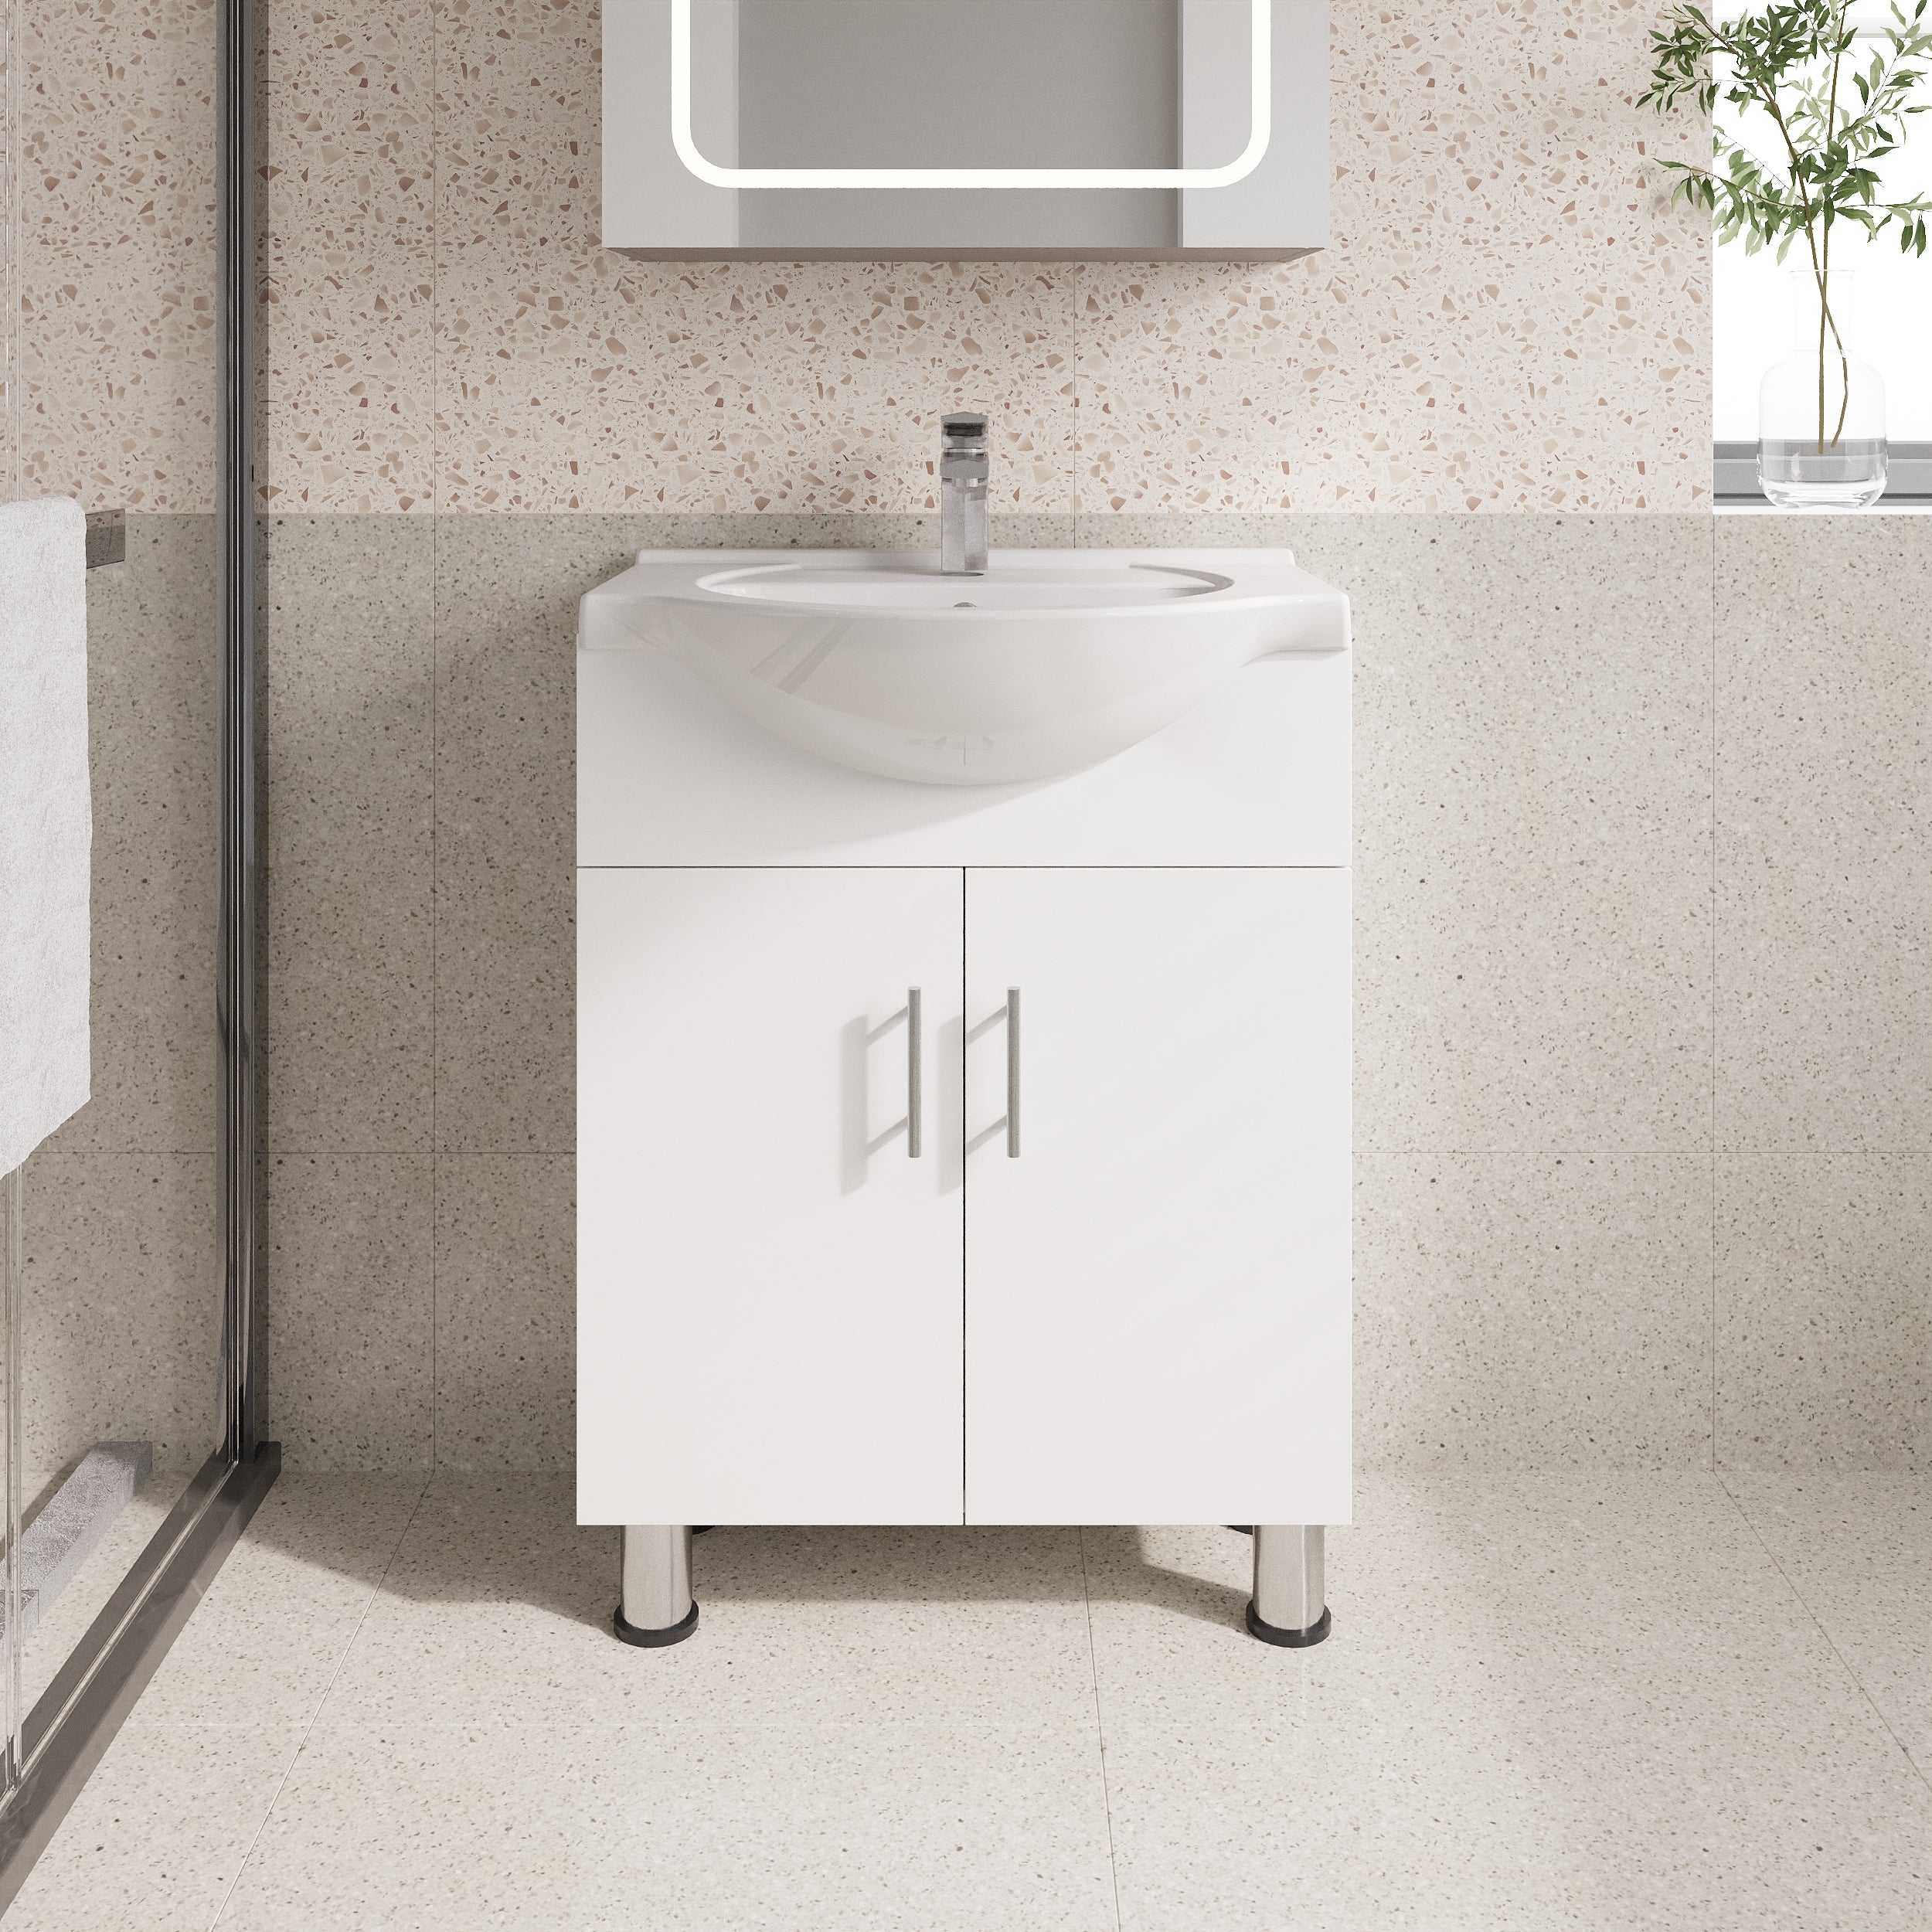 Lilly 24" W x 18" D x 34" H Euro-Style Vanity in White with Ceramic Vanity Top - Dreamwerks